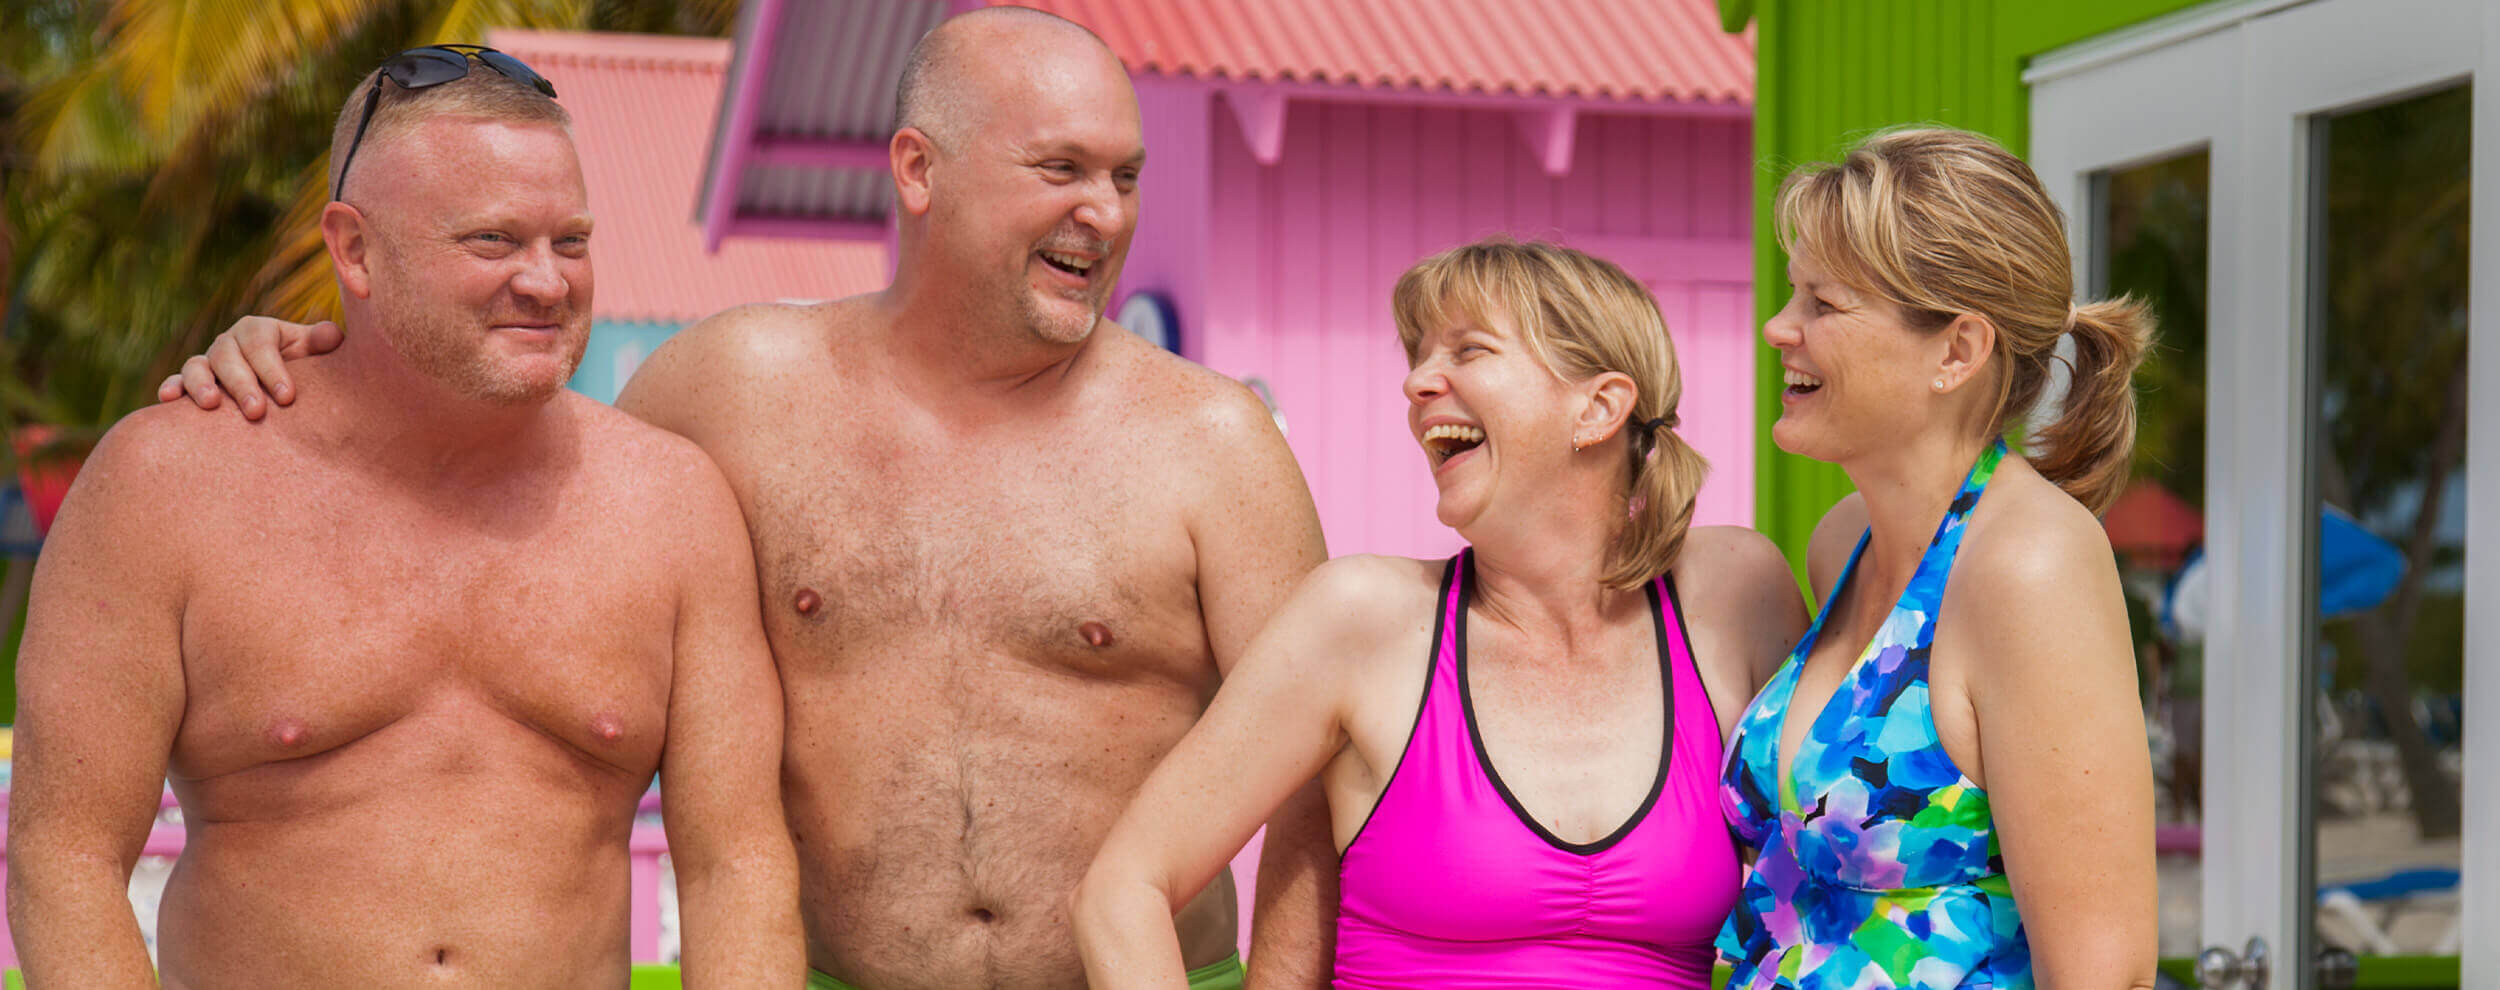 two shirtless men laughing with two women in bathing suits in front of colorful bungalow